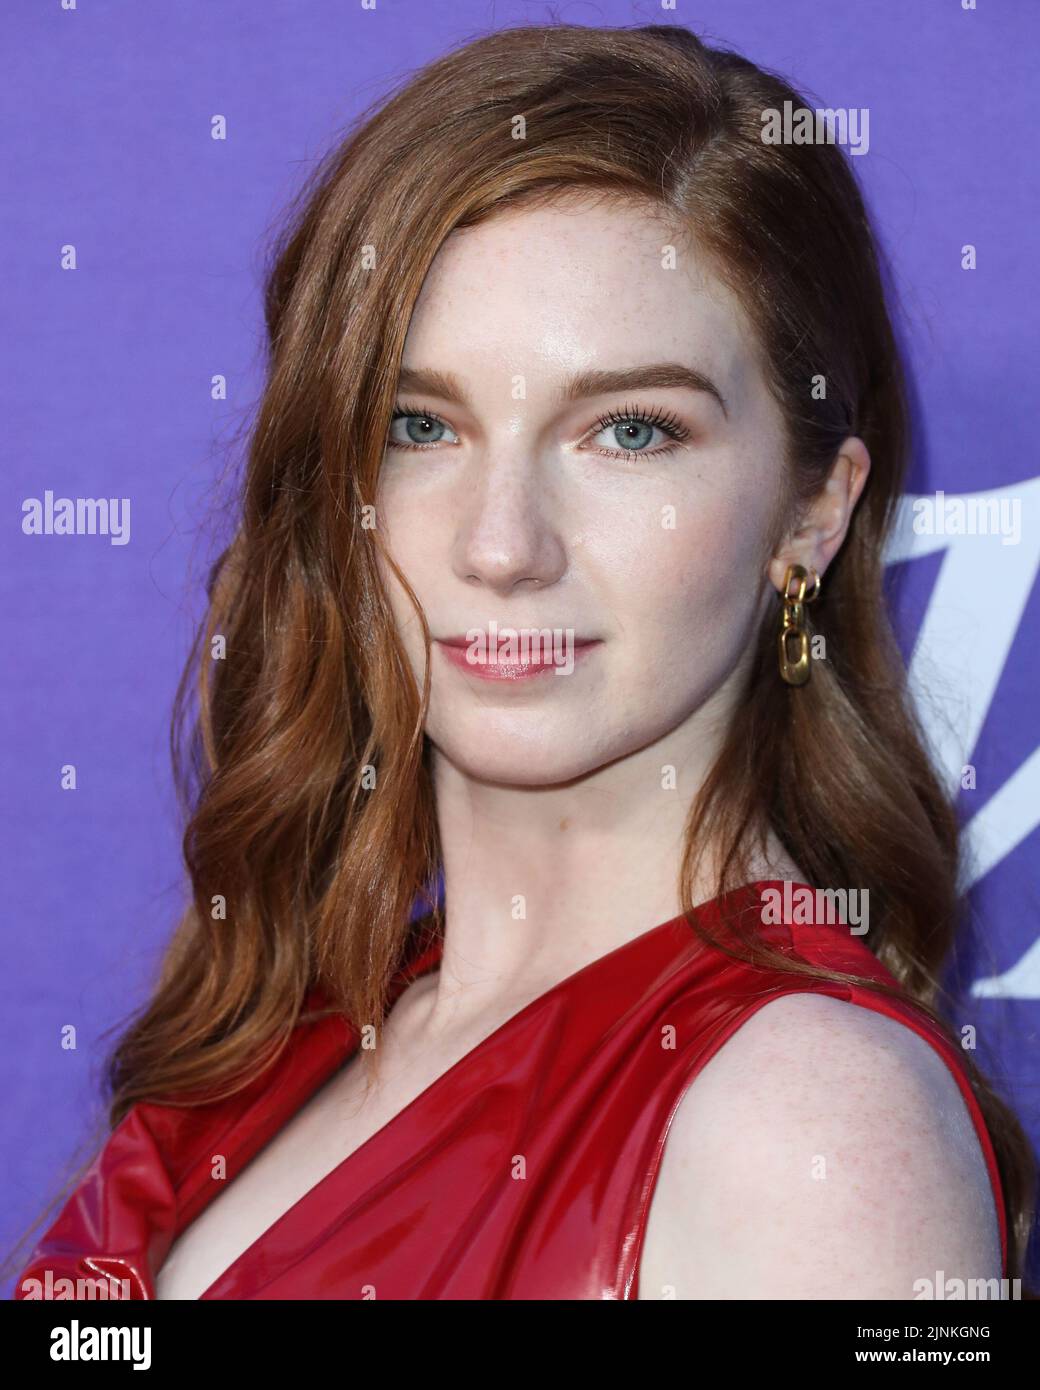 HOLLYWOOD, LOS ANGELES, CALIFORNIA, USA - AUGUST 11: American actress Annalise Basso arrives at the Variety 2022 Power Of Young Hollywood Celebration Presented By Facebook Gaming held at NeueHouse Los Angeles on August 11, 2022 in Hollywood, Los Angeles, California, United States. (Photo by Xavier Collin/Image Press Agency) Stock Photo